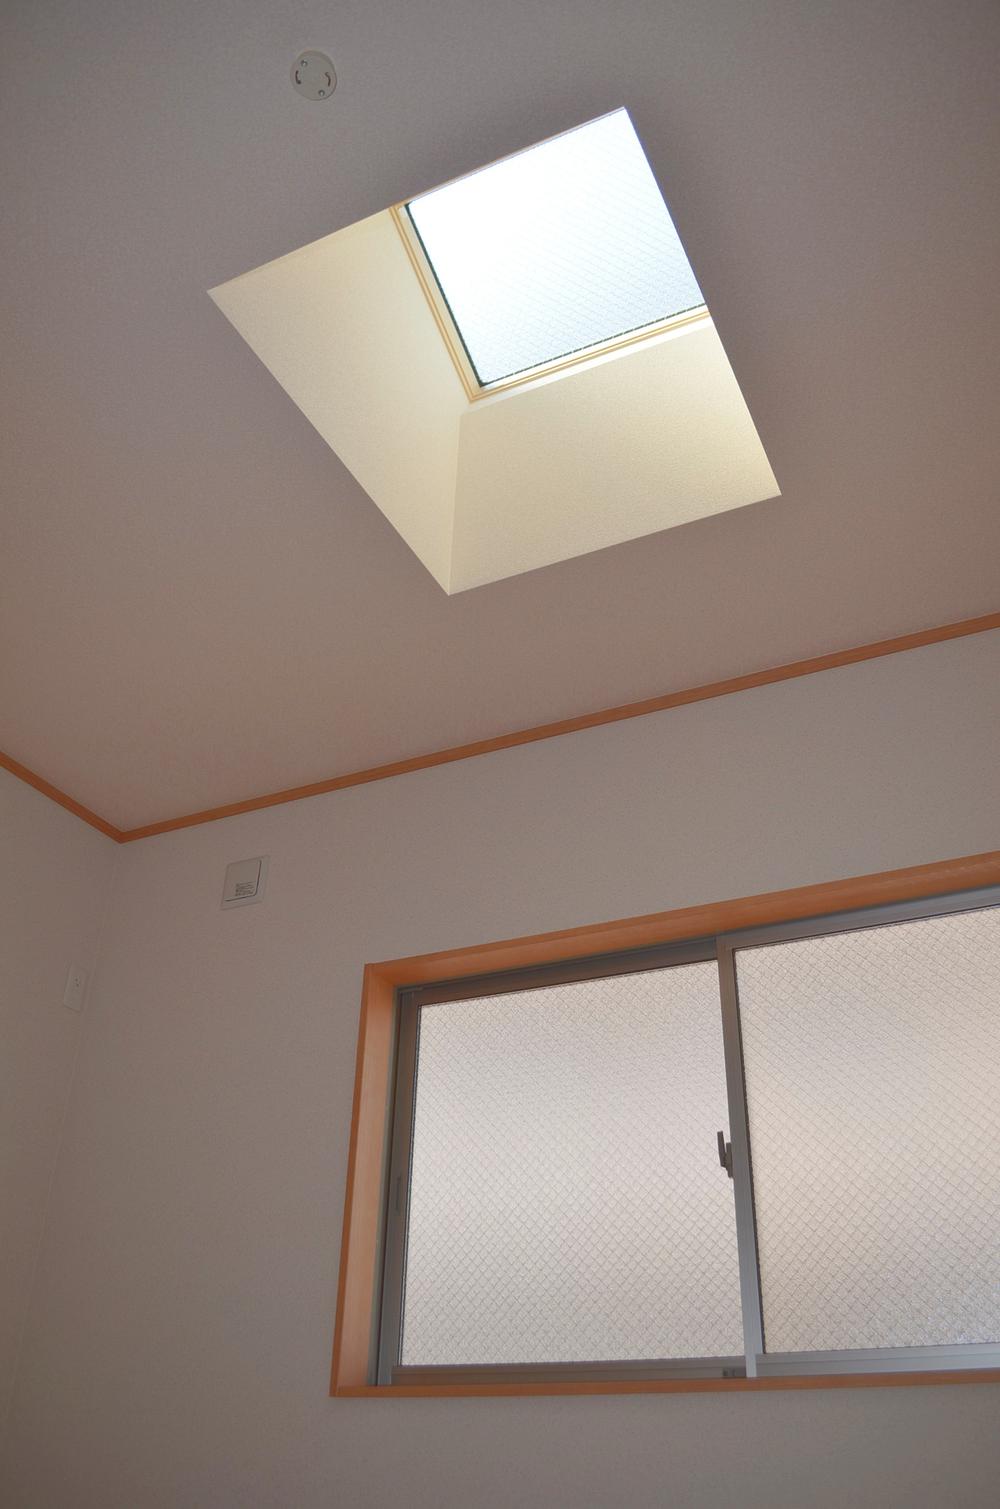 Other. There is also a skylight with No. land, Each room is very bright even take lighting